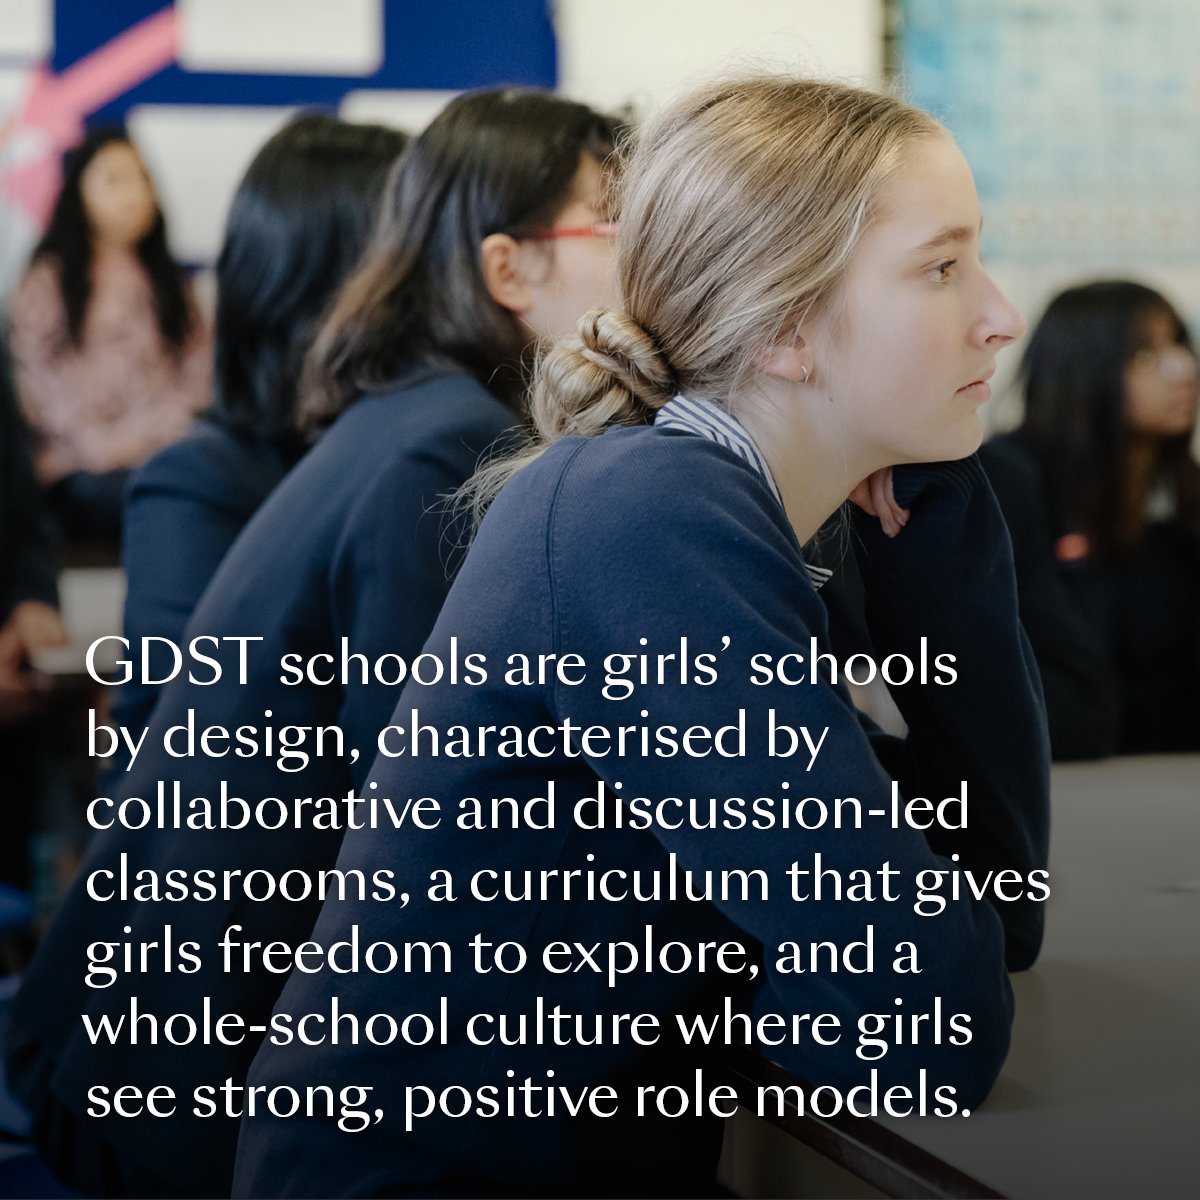 Discover the GDST Advantage and the benefits of a girls-only education at Oxford High School GDST. Book your place now for our Girls' Futures event on Wednesday 7th February: ow.ly/vulu50QuqHi

#GirlsFutures #GDST #OHS #OxfordHighSchool